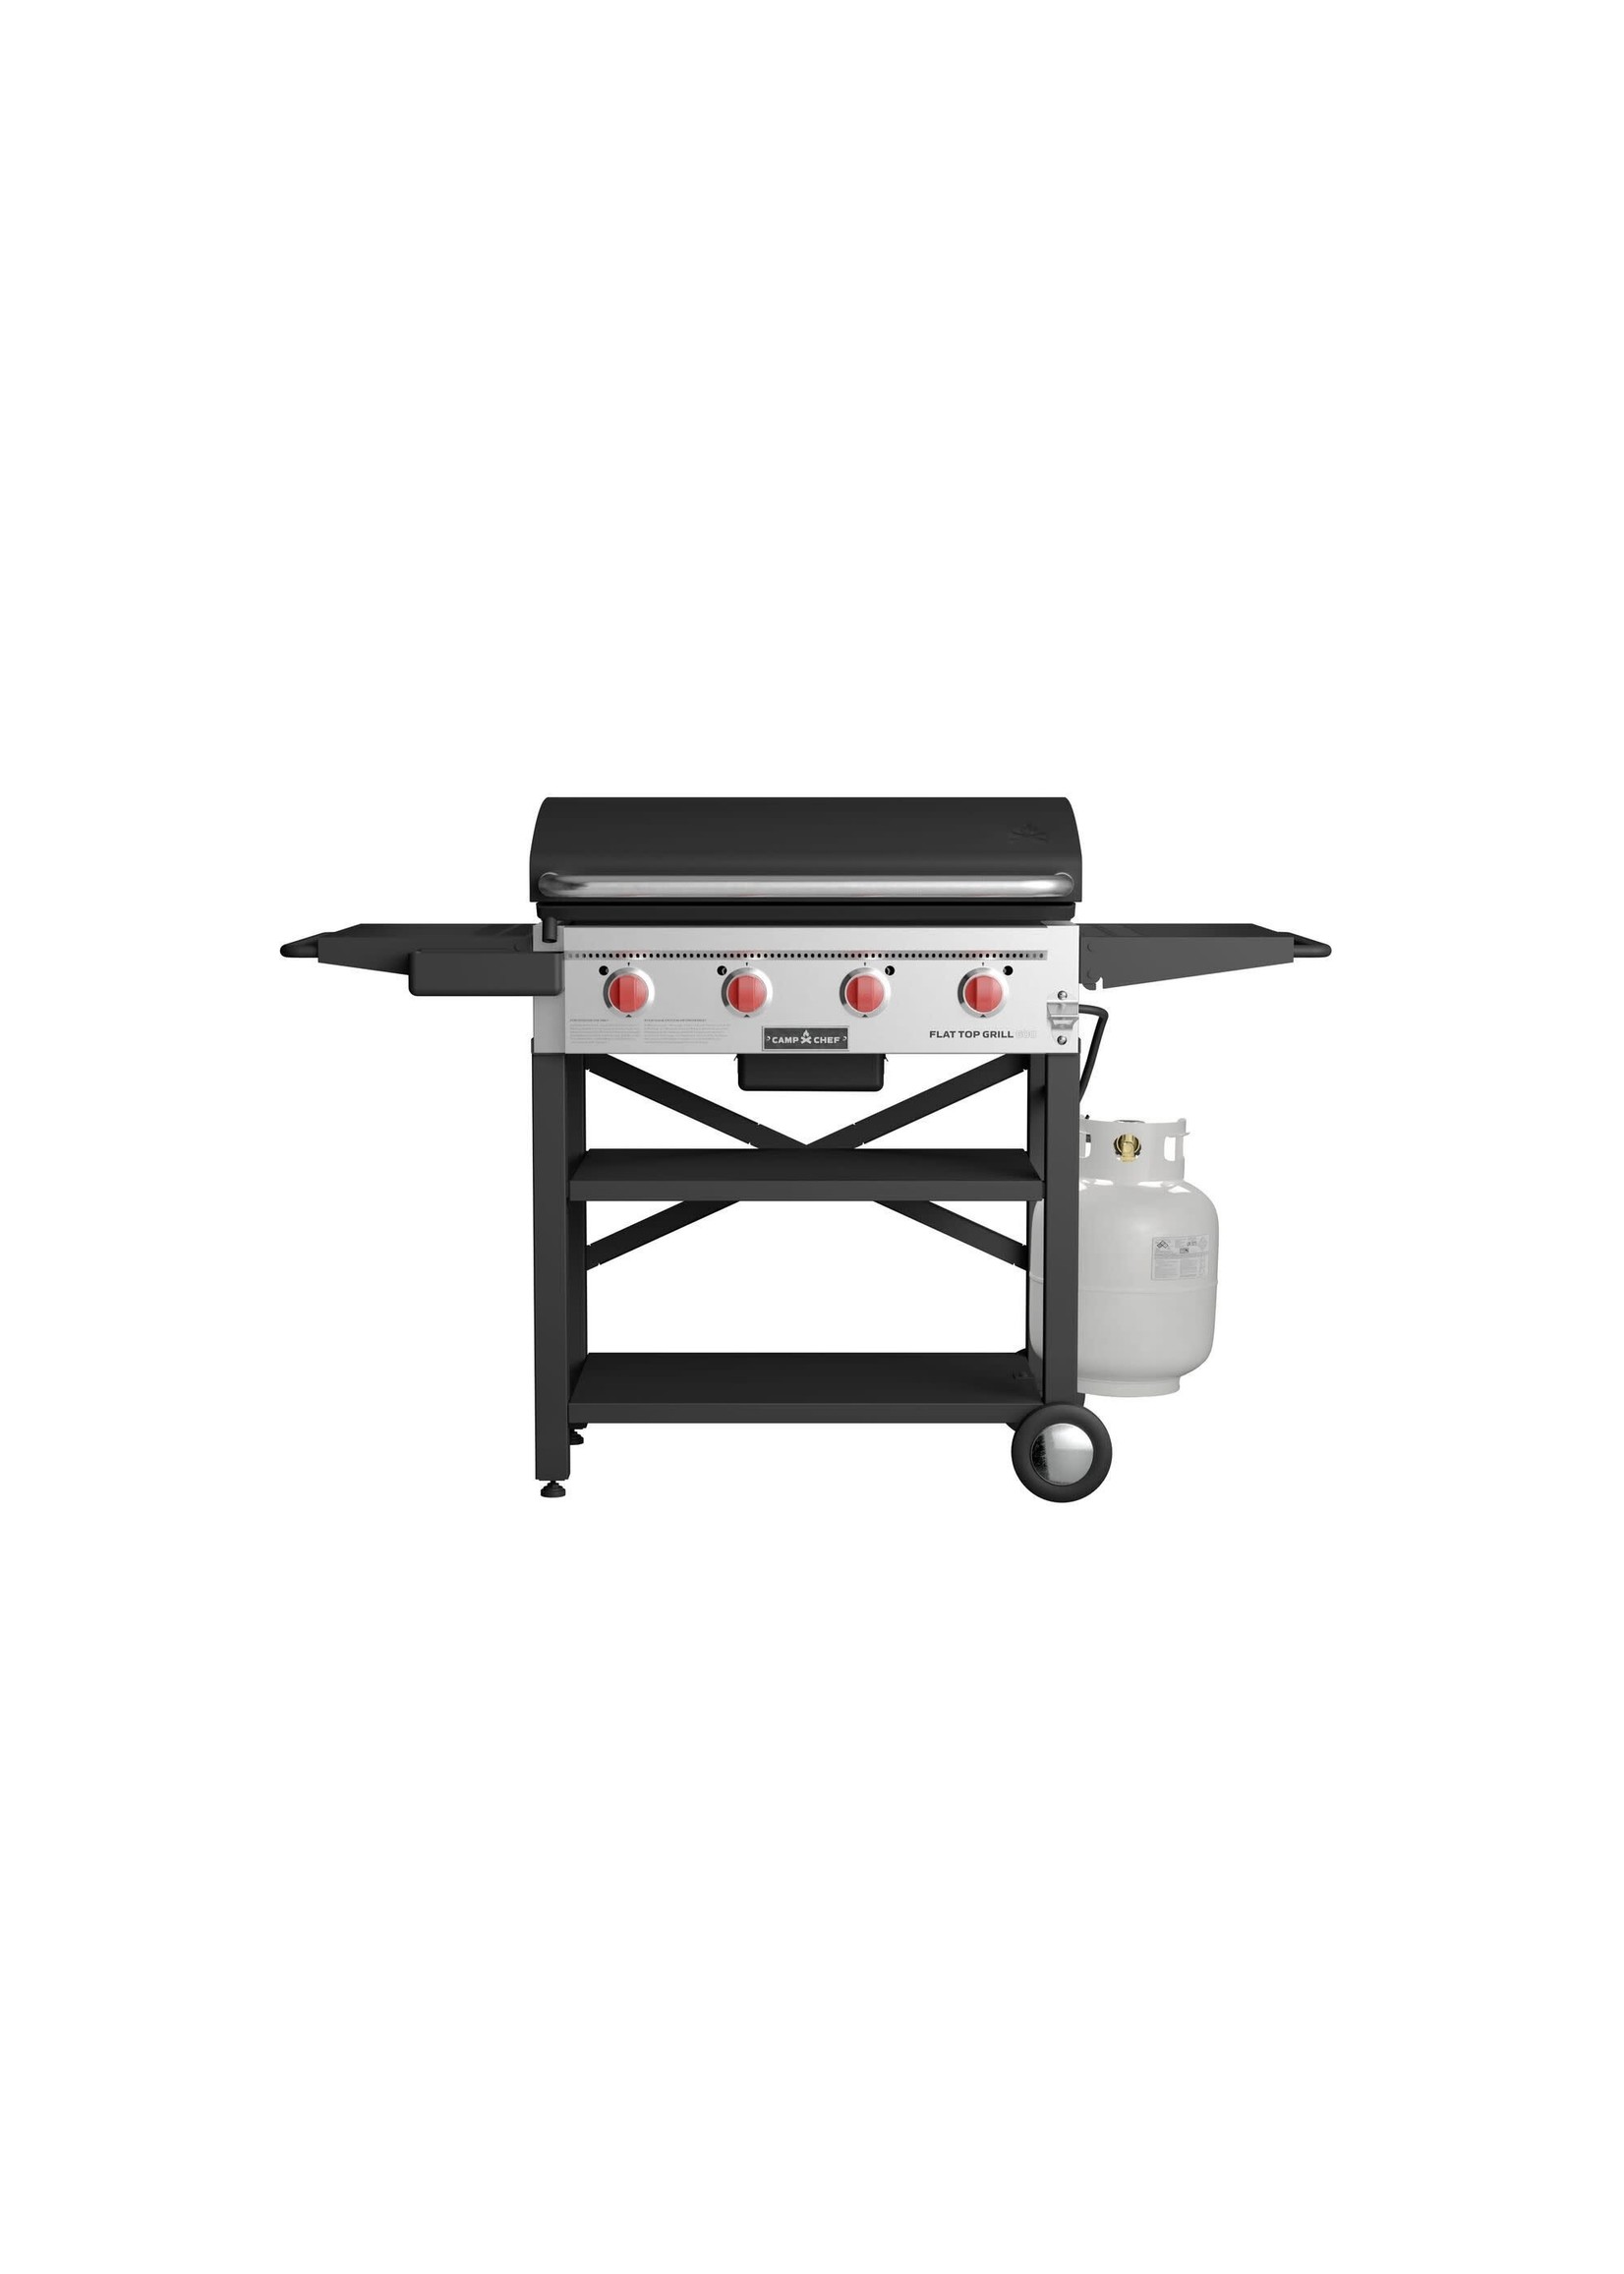 Camp Chef Camp Chef 4 Burner Flat Top Grill Griddle w/ Lid